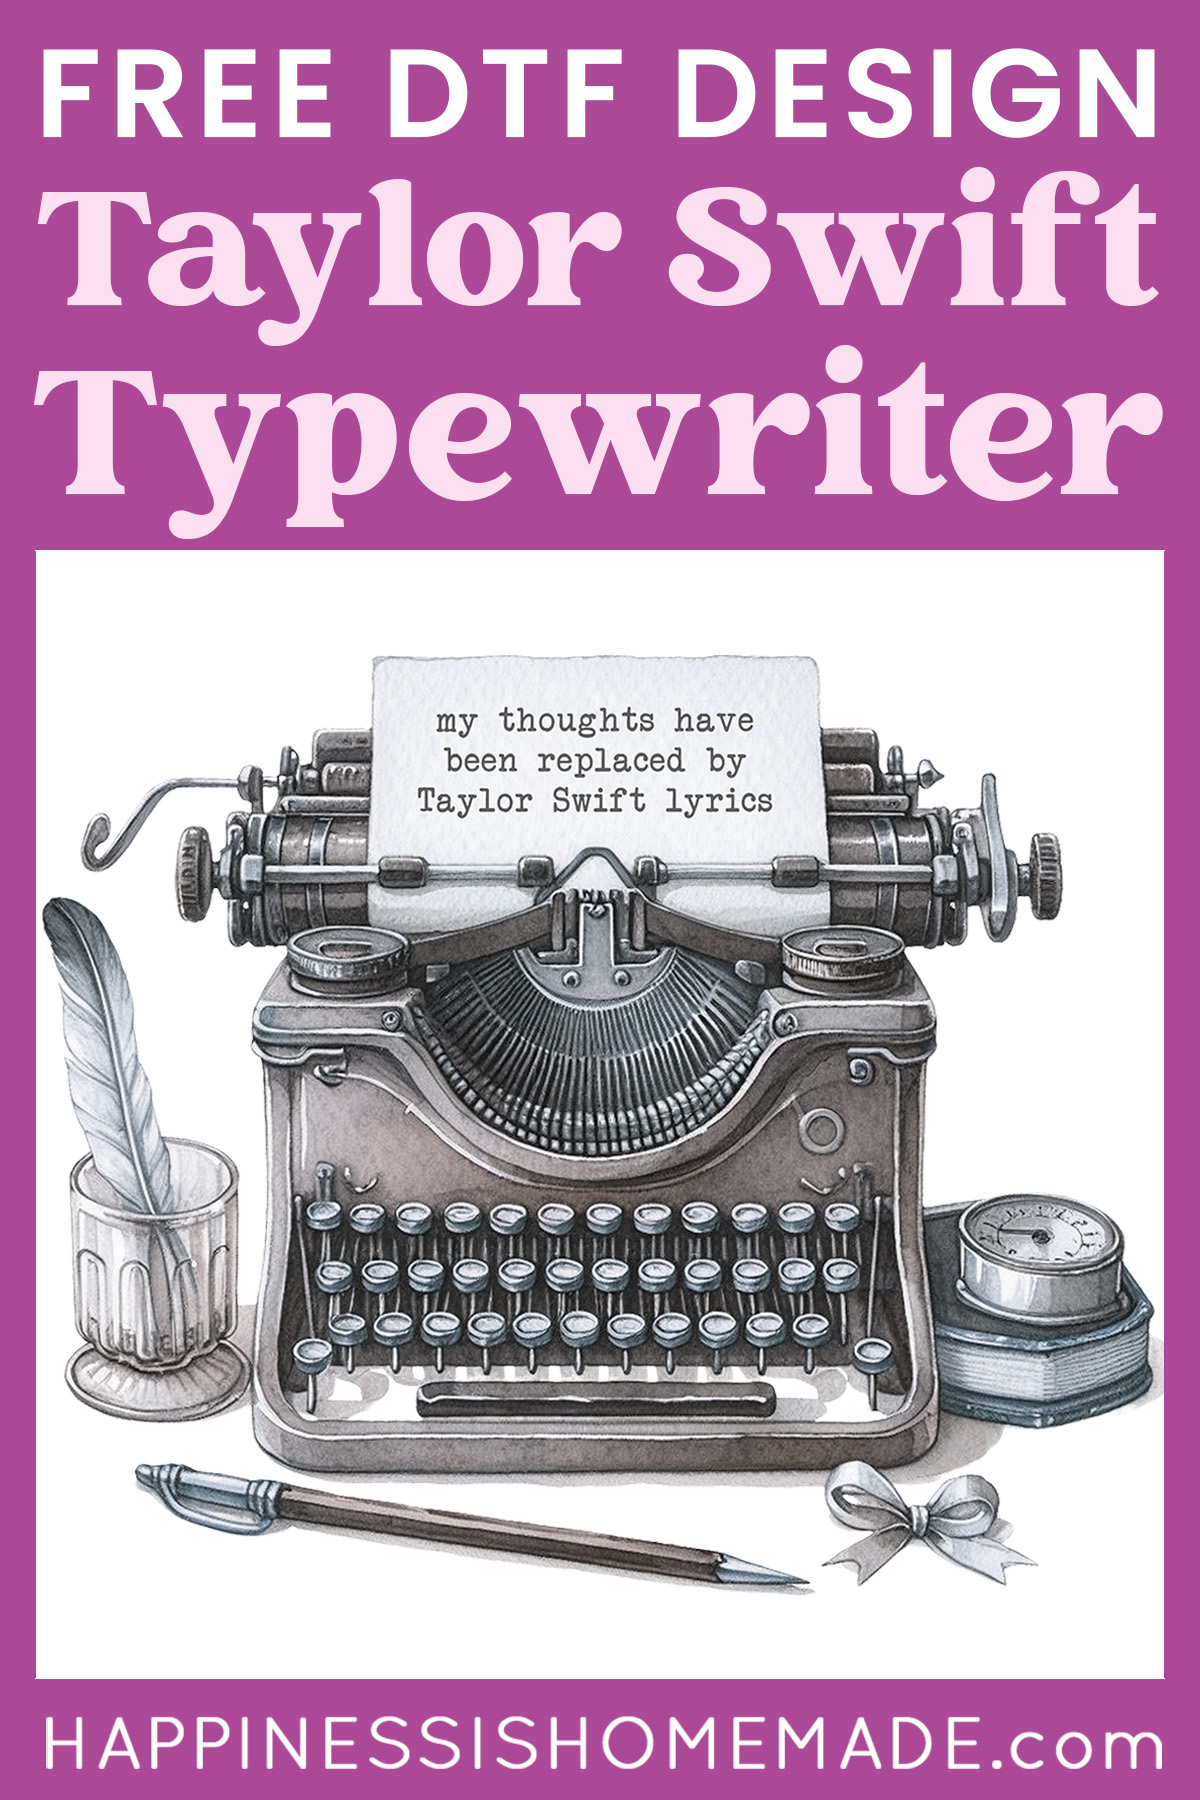 "Free DTF Design: Taylor Swift Typewriter" graphic on purple background with typewriter and quill pen design